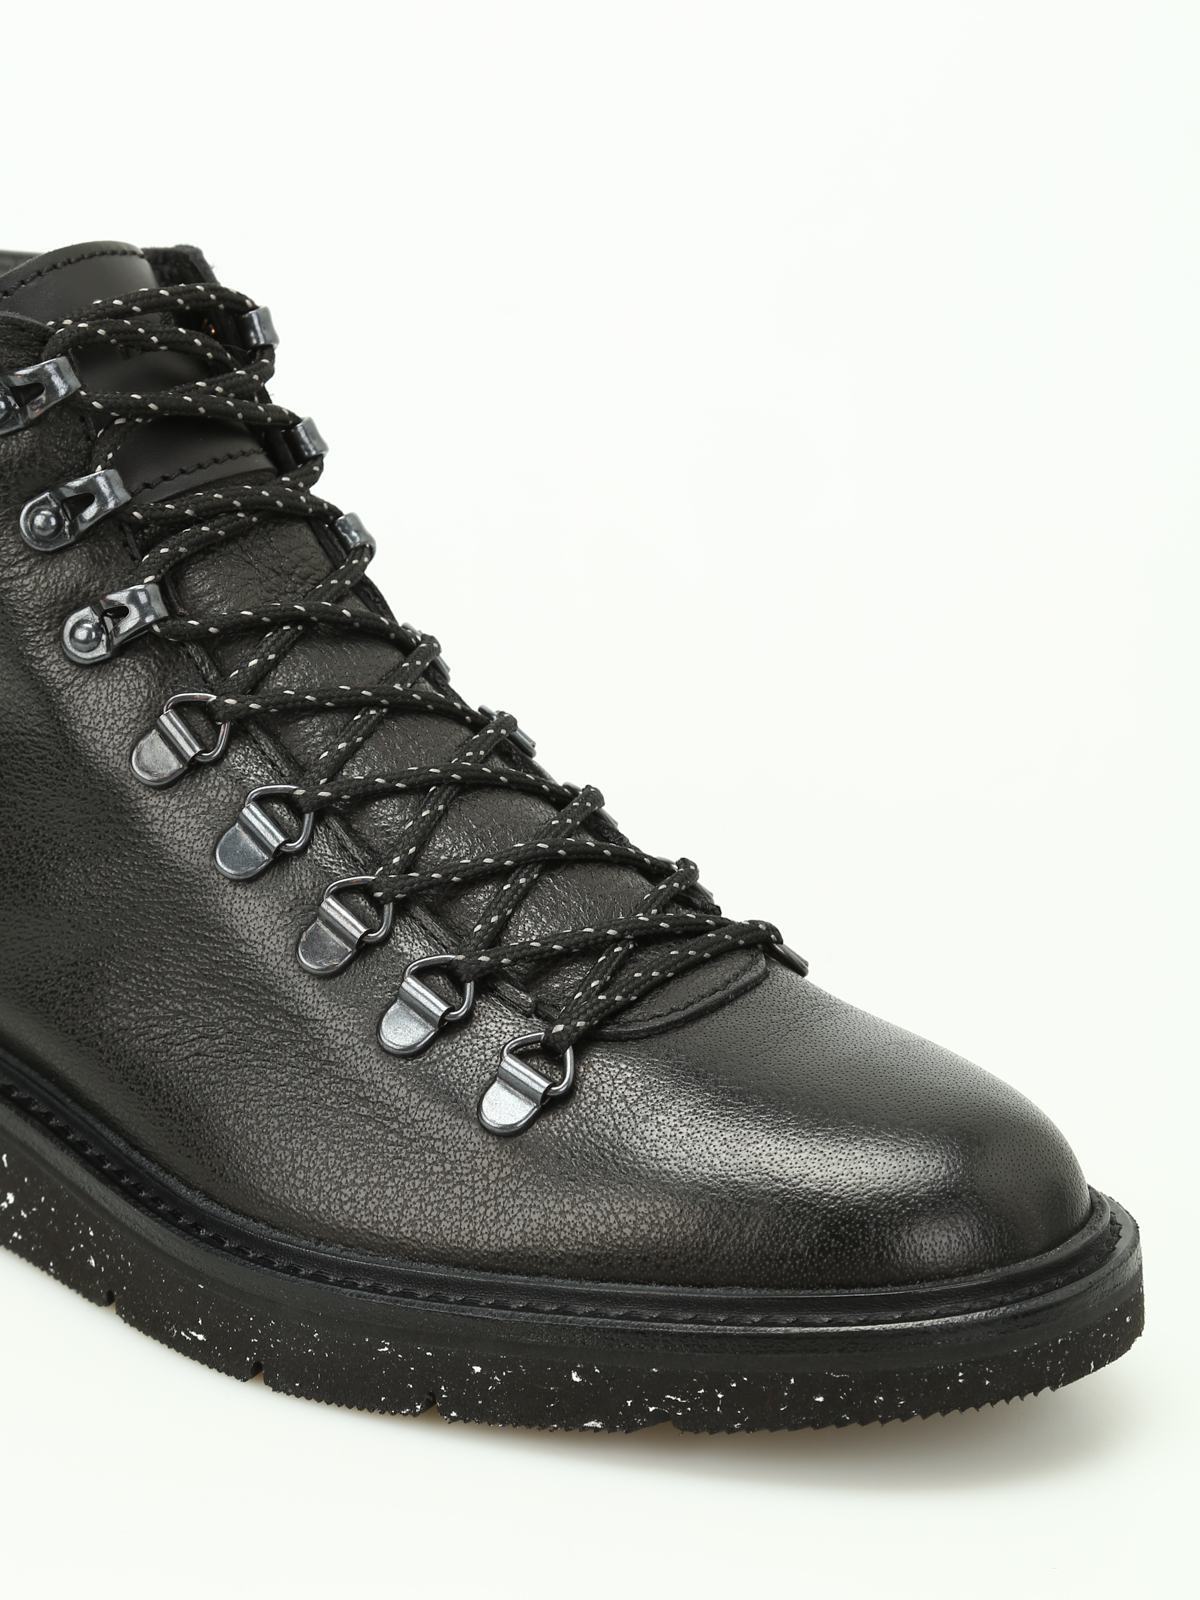 H334 grainy leather hiking boots 